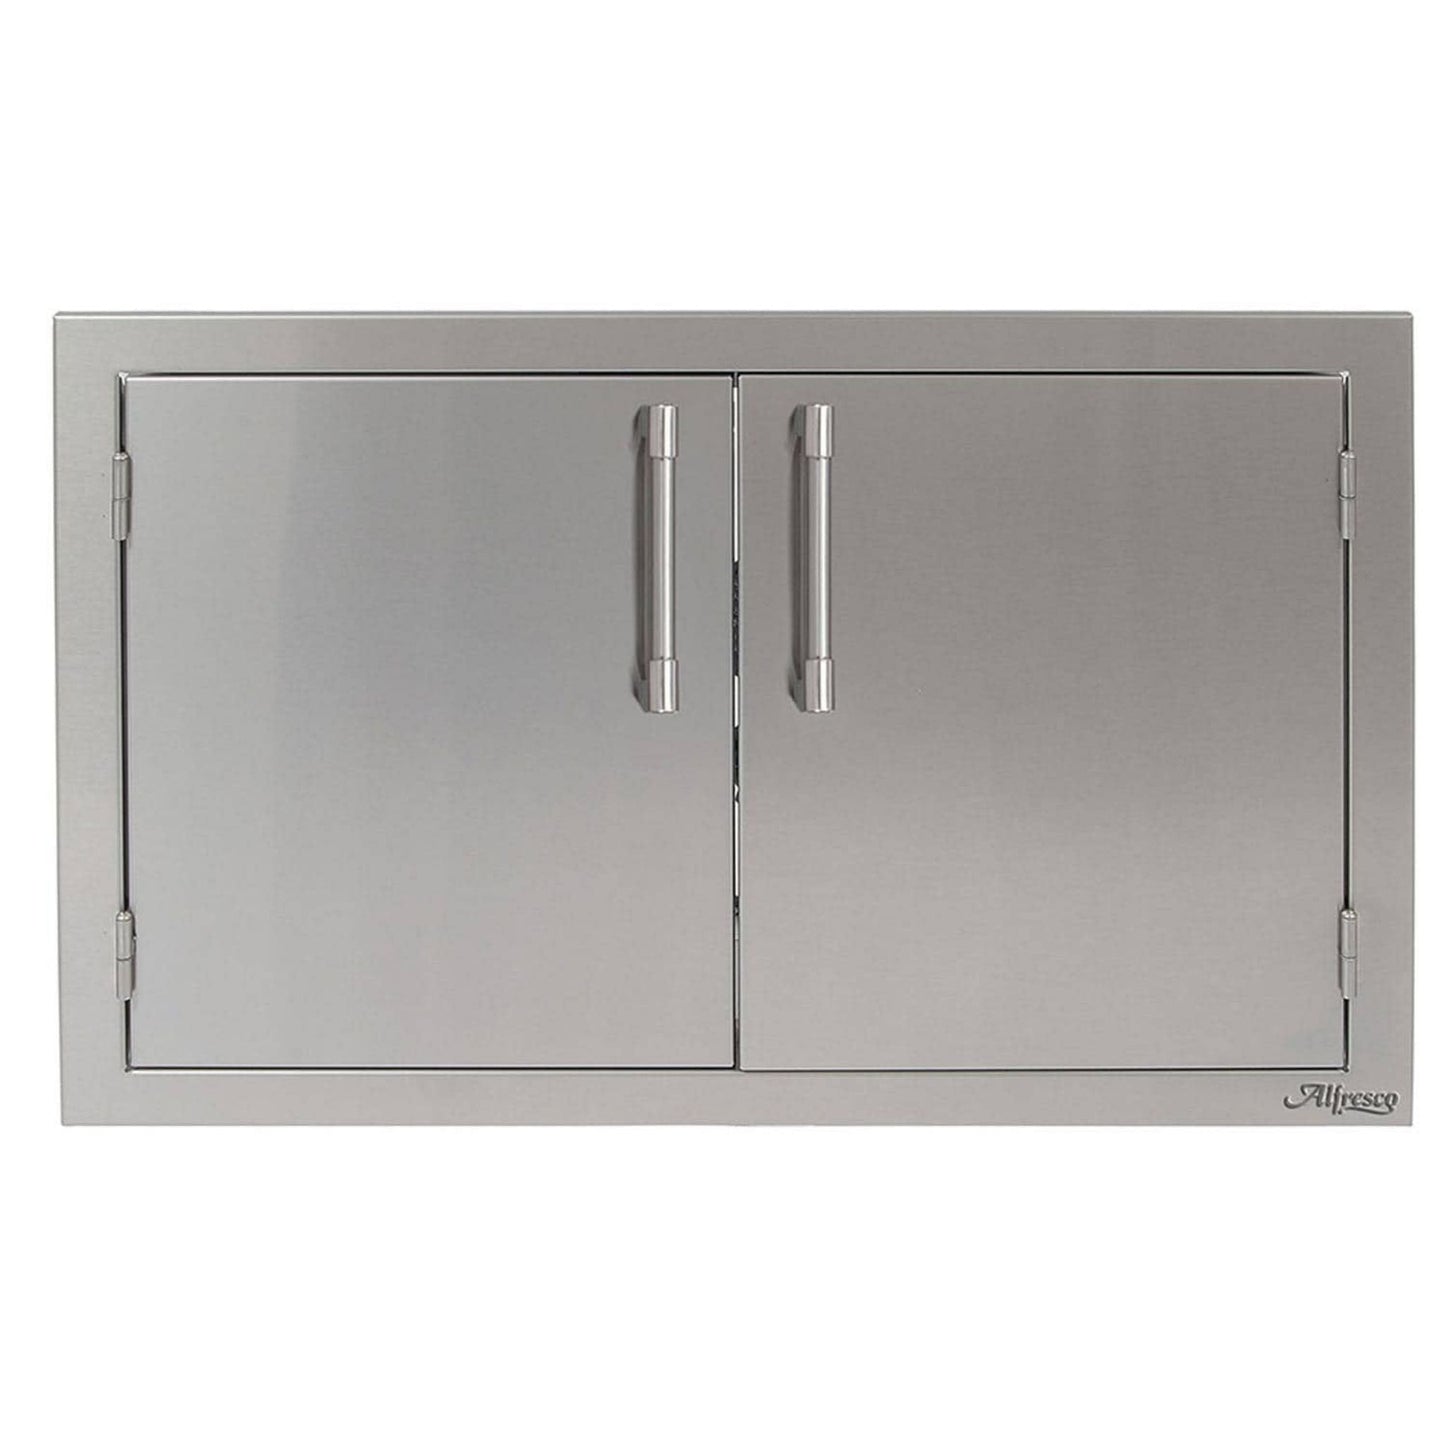 Alfresco 36" Signal White Matte Stainless Steel Double Access Doors